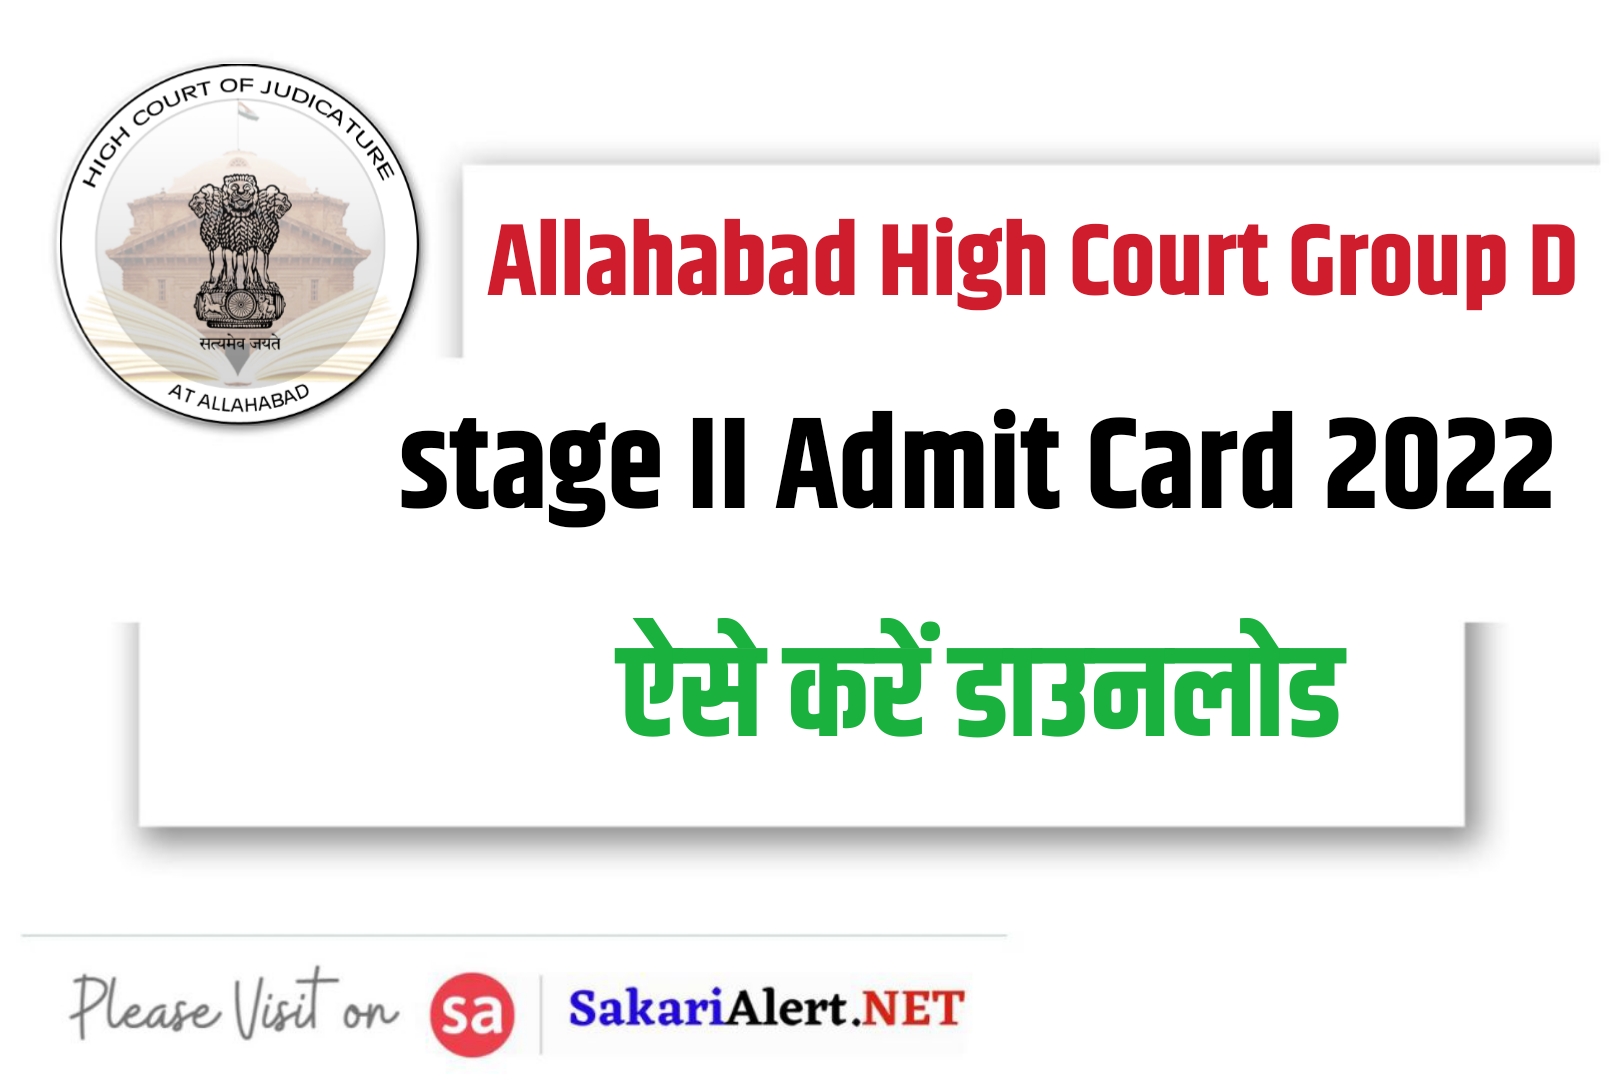 Allahabad High Court Group D stage II Admit Card 2022